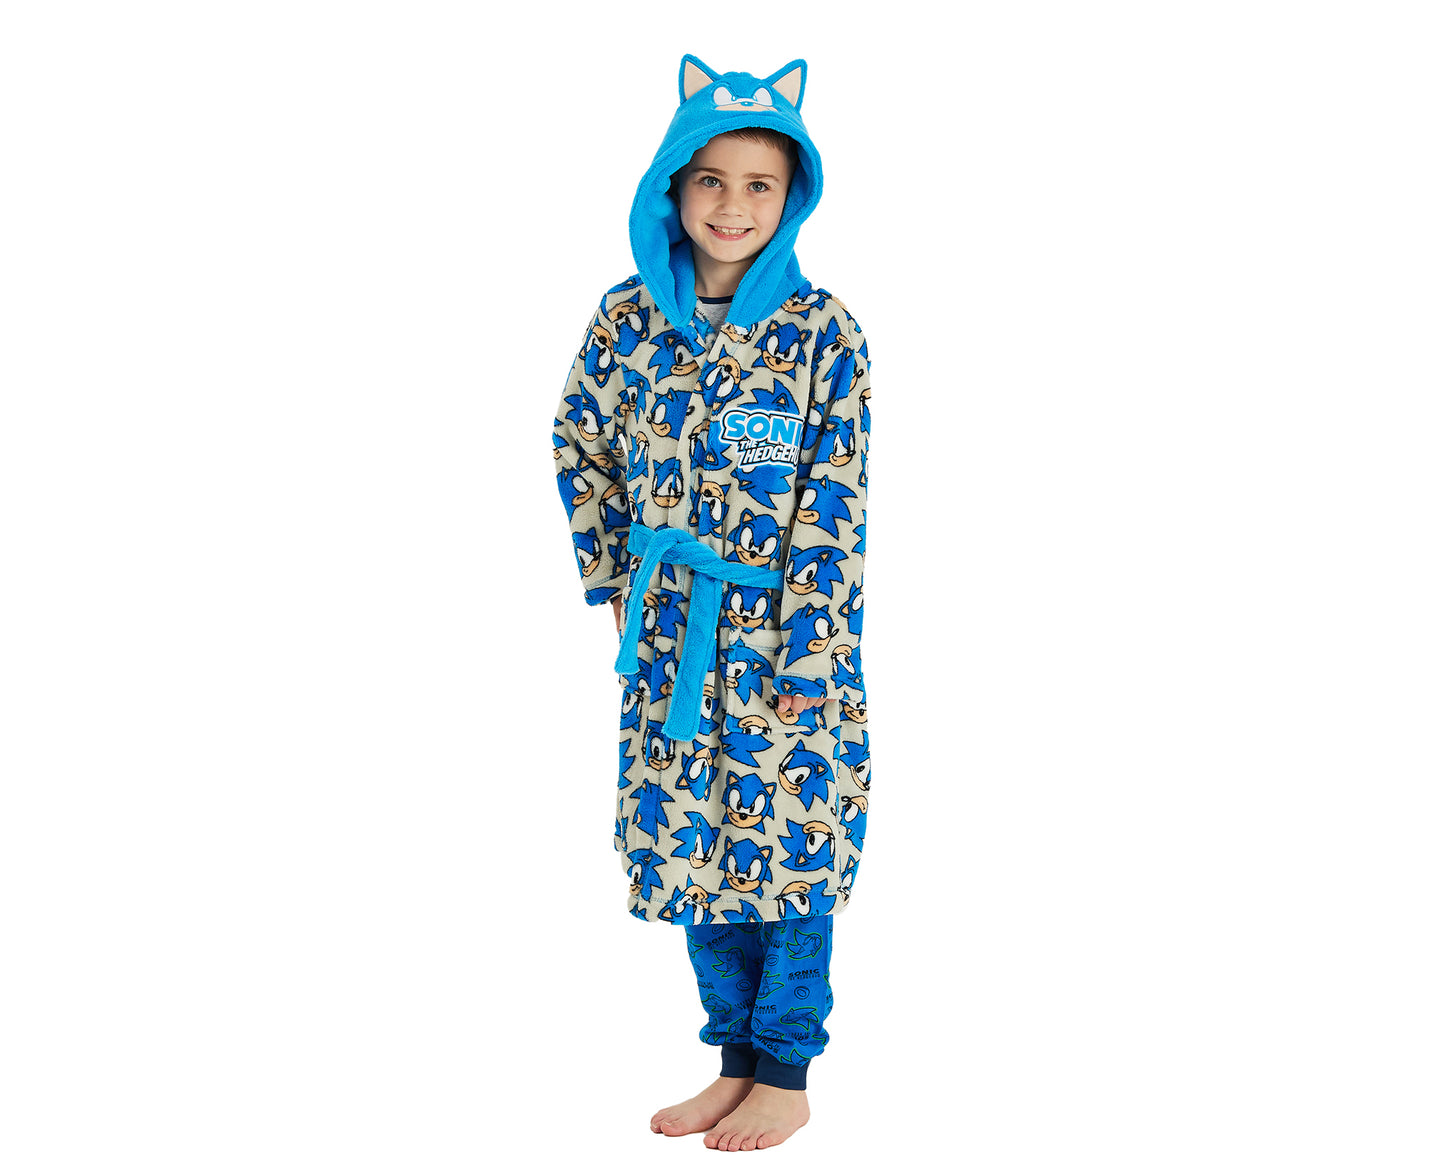 Boys Sonic The Hedgehog Dressing Gown - Patterned